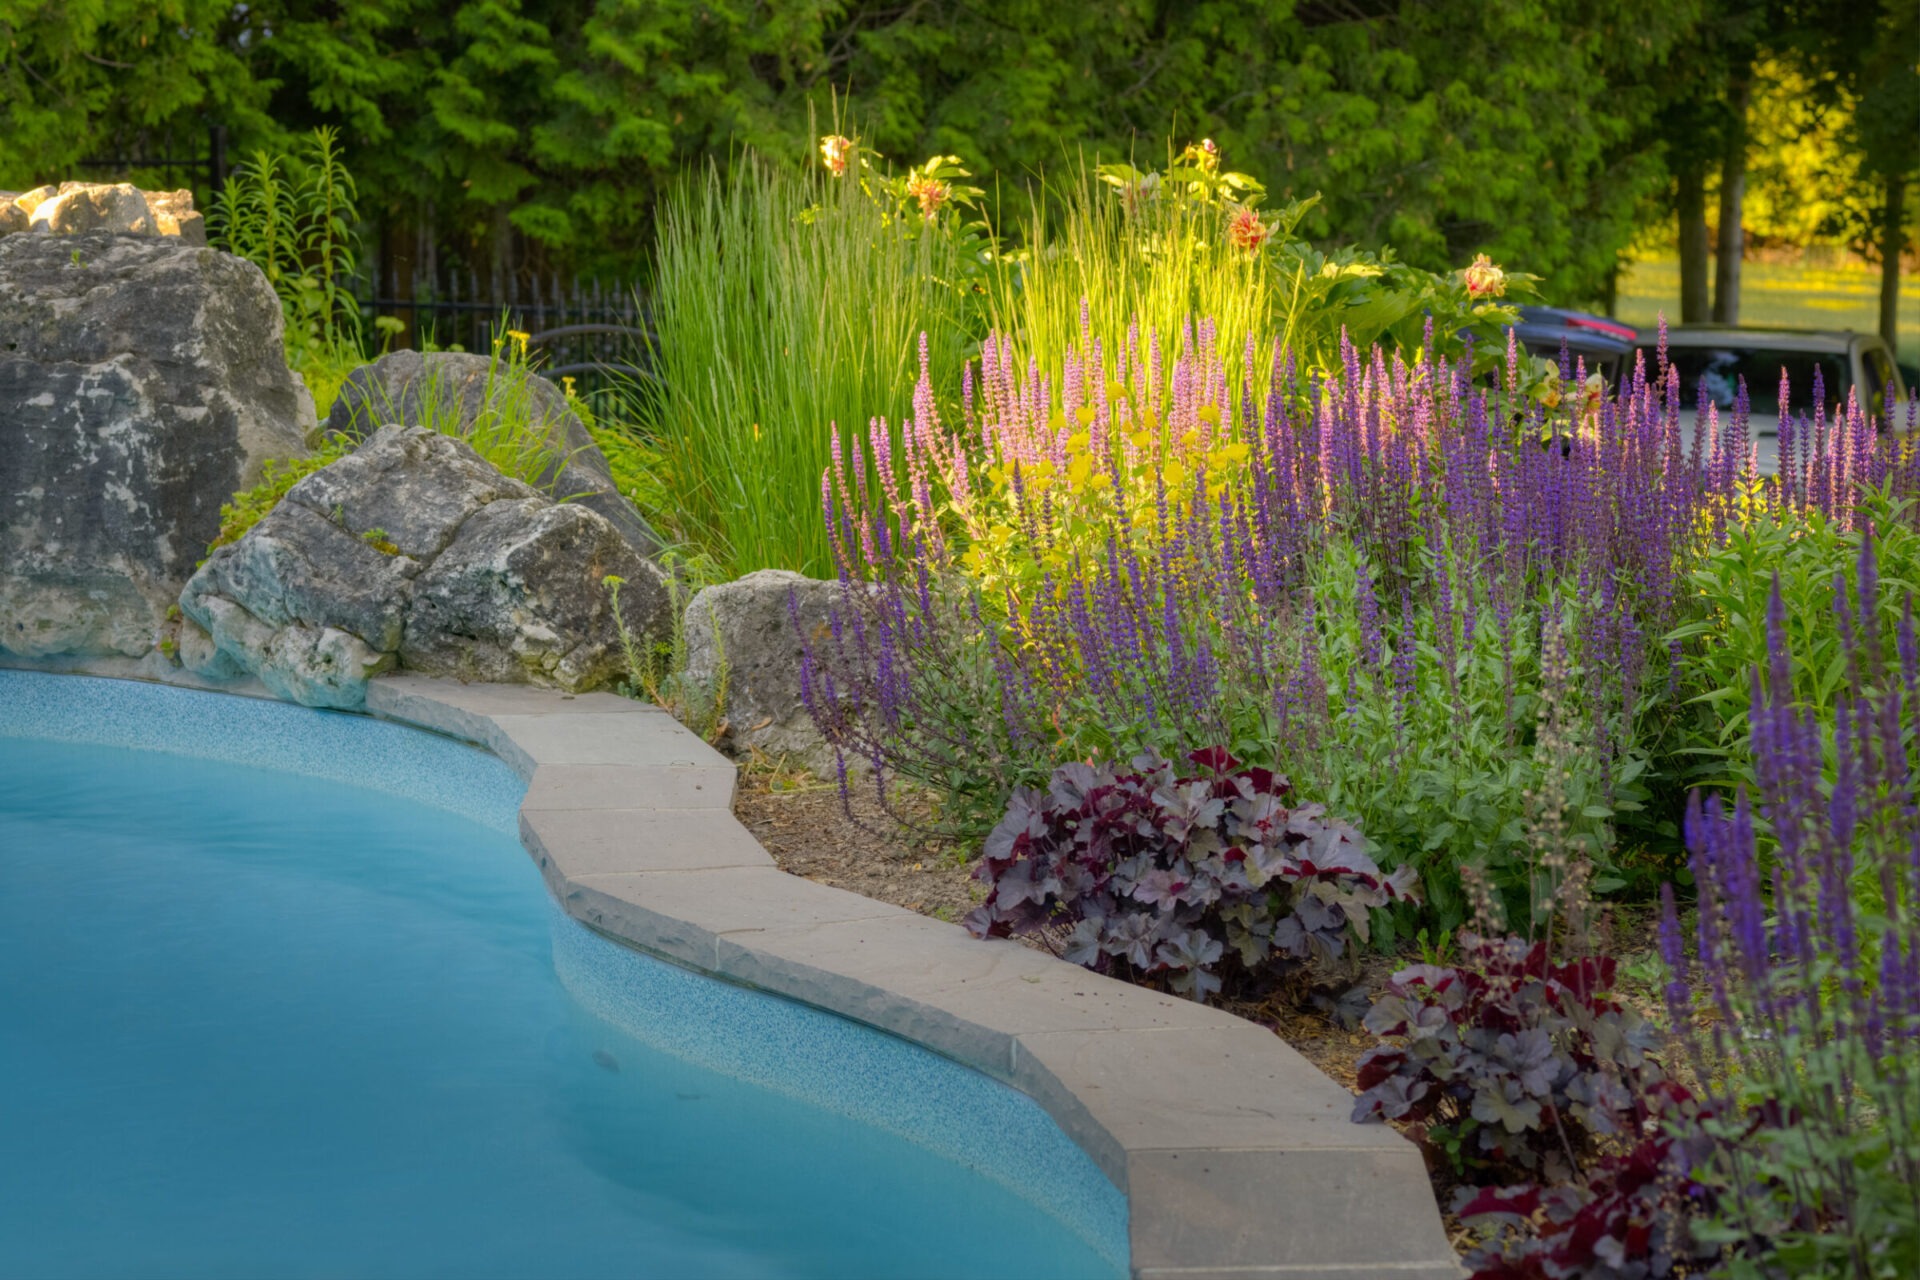 A serene garden with blooming purple flowers next to a clear blue pool, flanked by natural stones and vibrant green foliage in soft light.